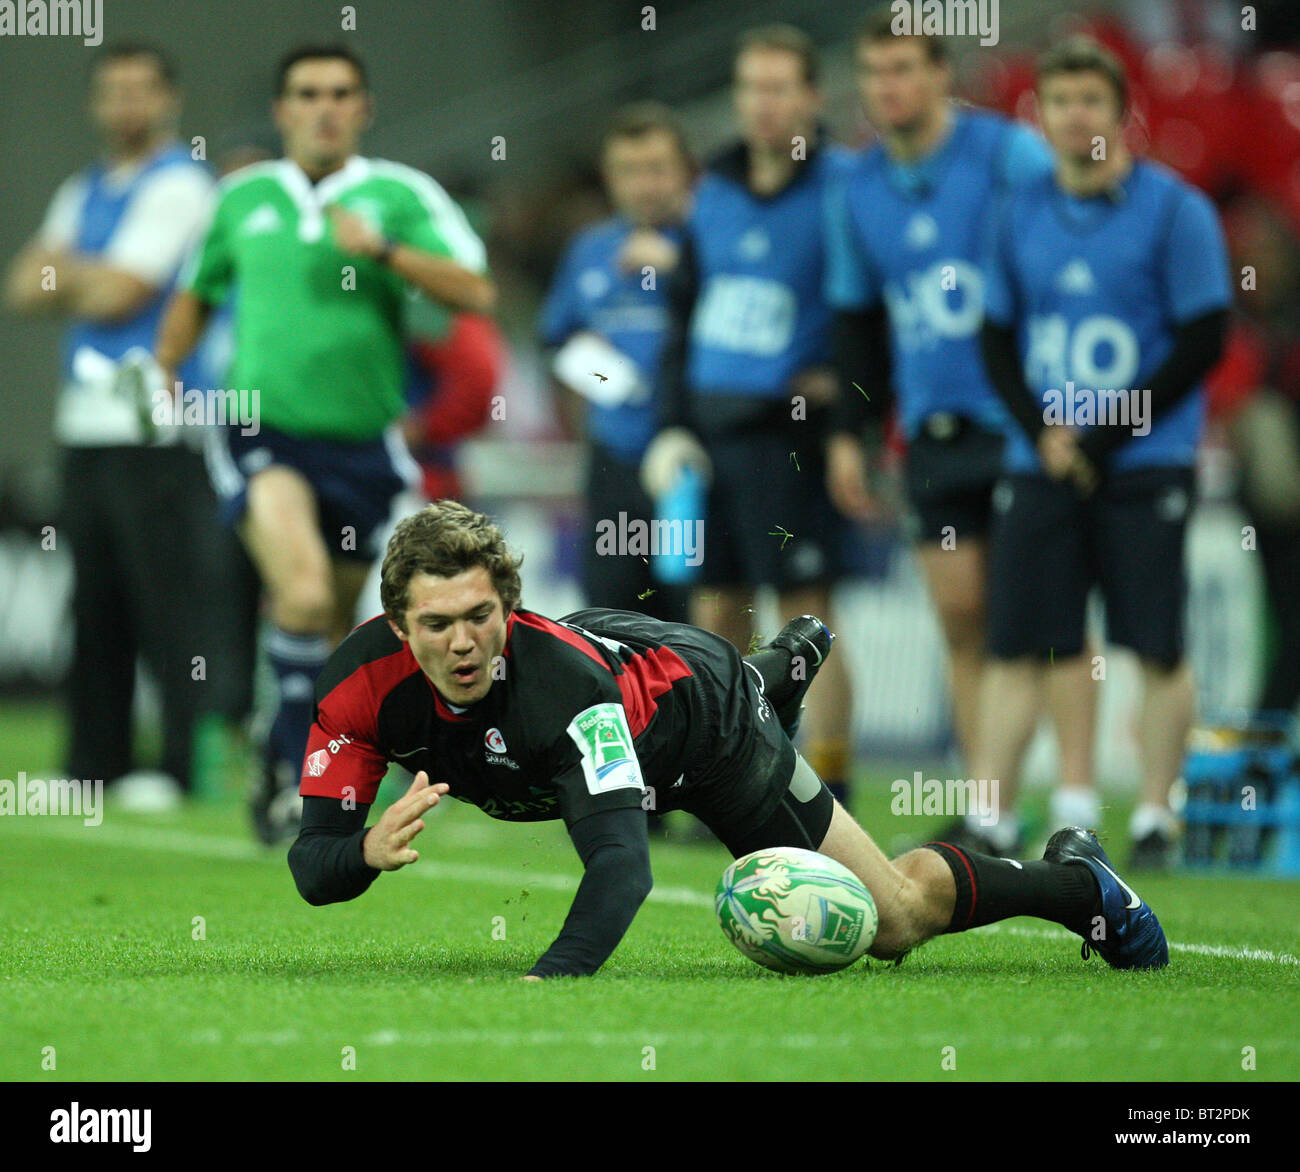 Alex Goode of Saracens fell down with the ball on the pitch during the Heineken Cup Rugby match Saracens v Leinster. Stock Photo